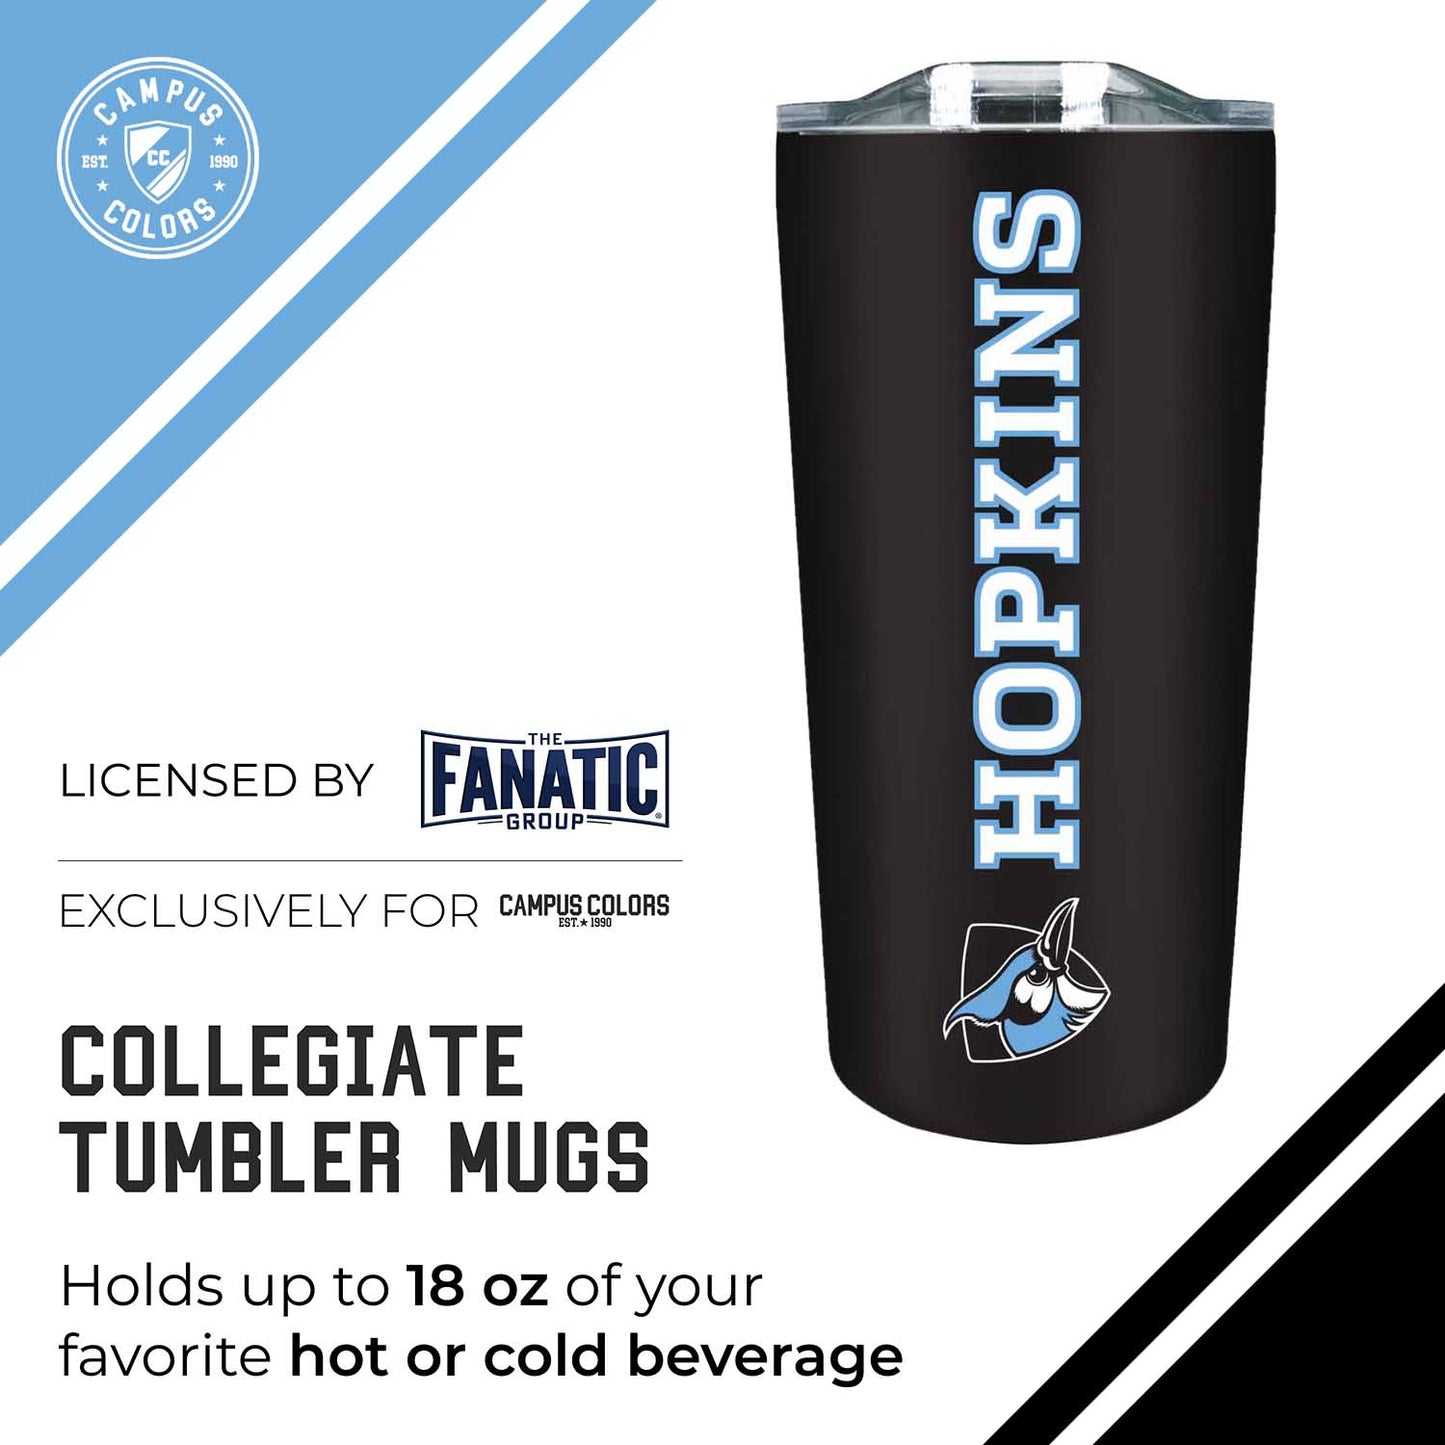 Johns Hopkins Blue Jays NCAA Stainless Steel Tumbler perfect for Gameday - Black